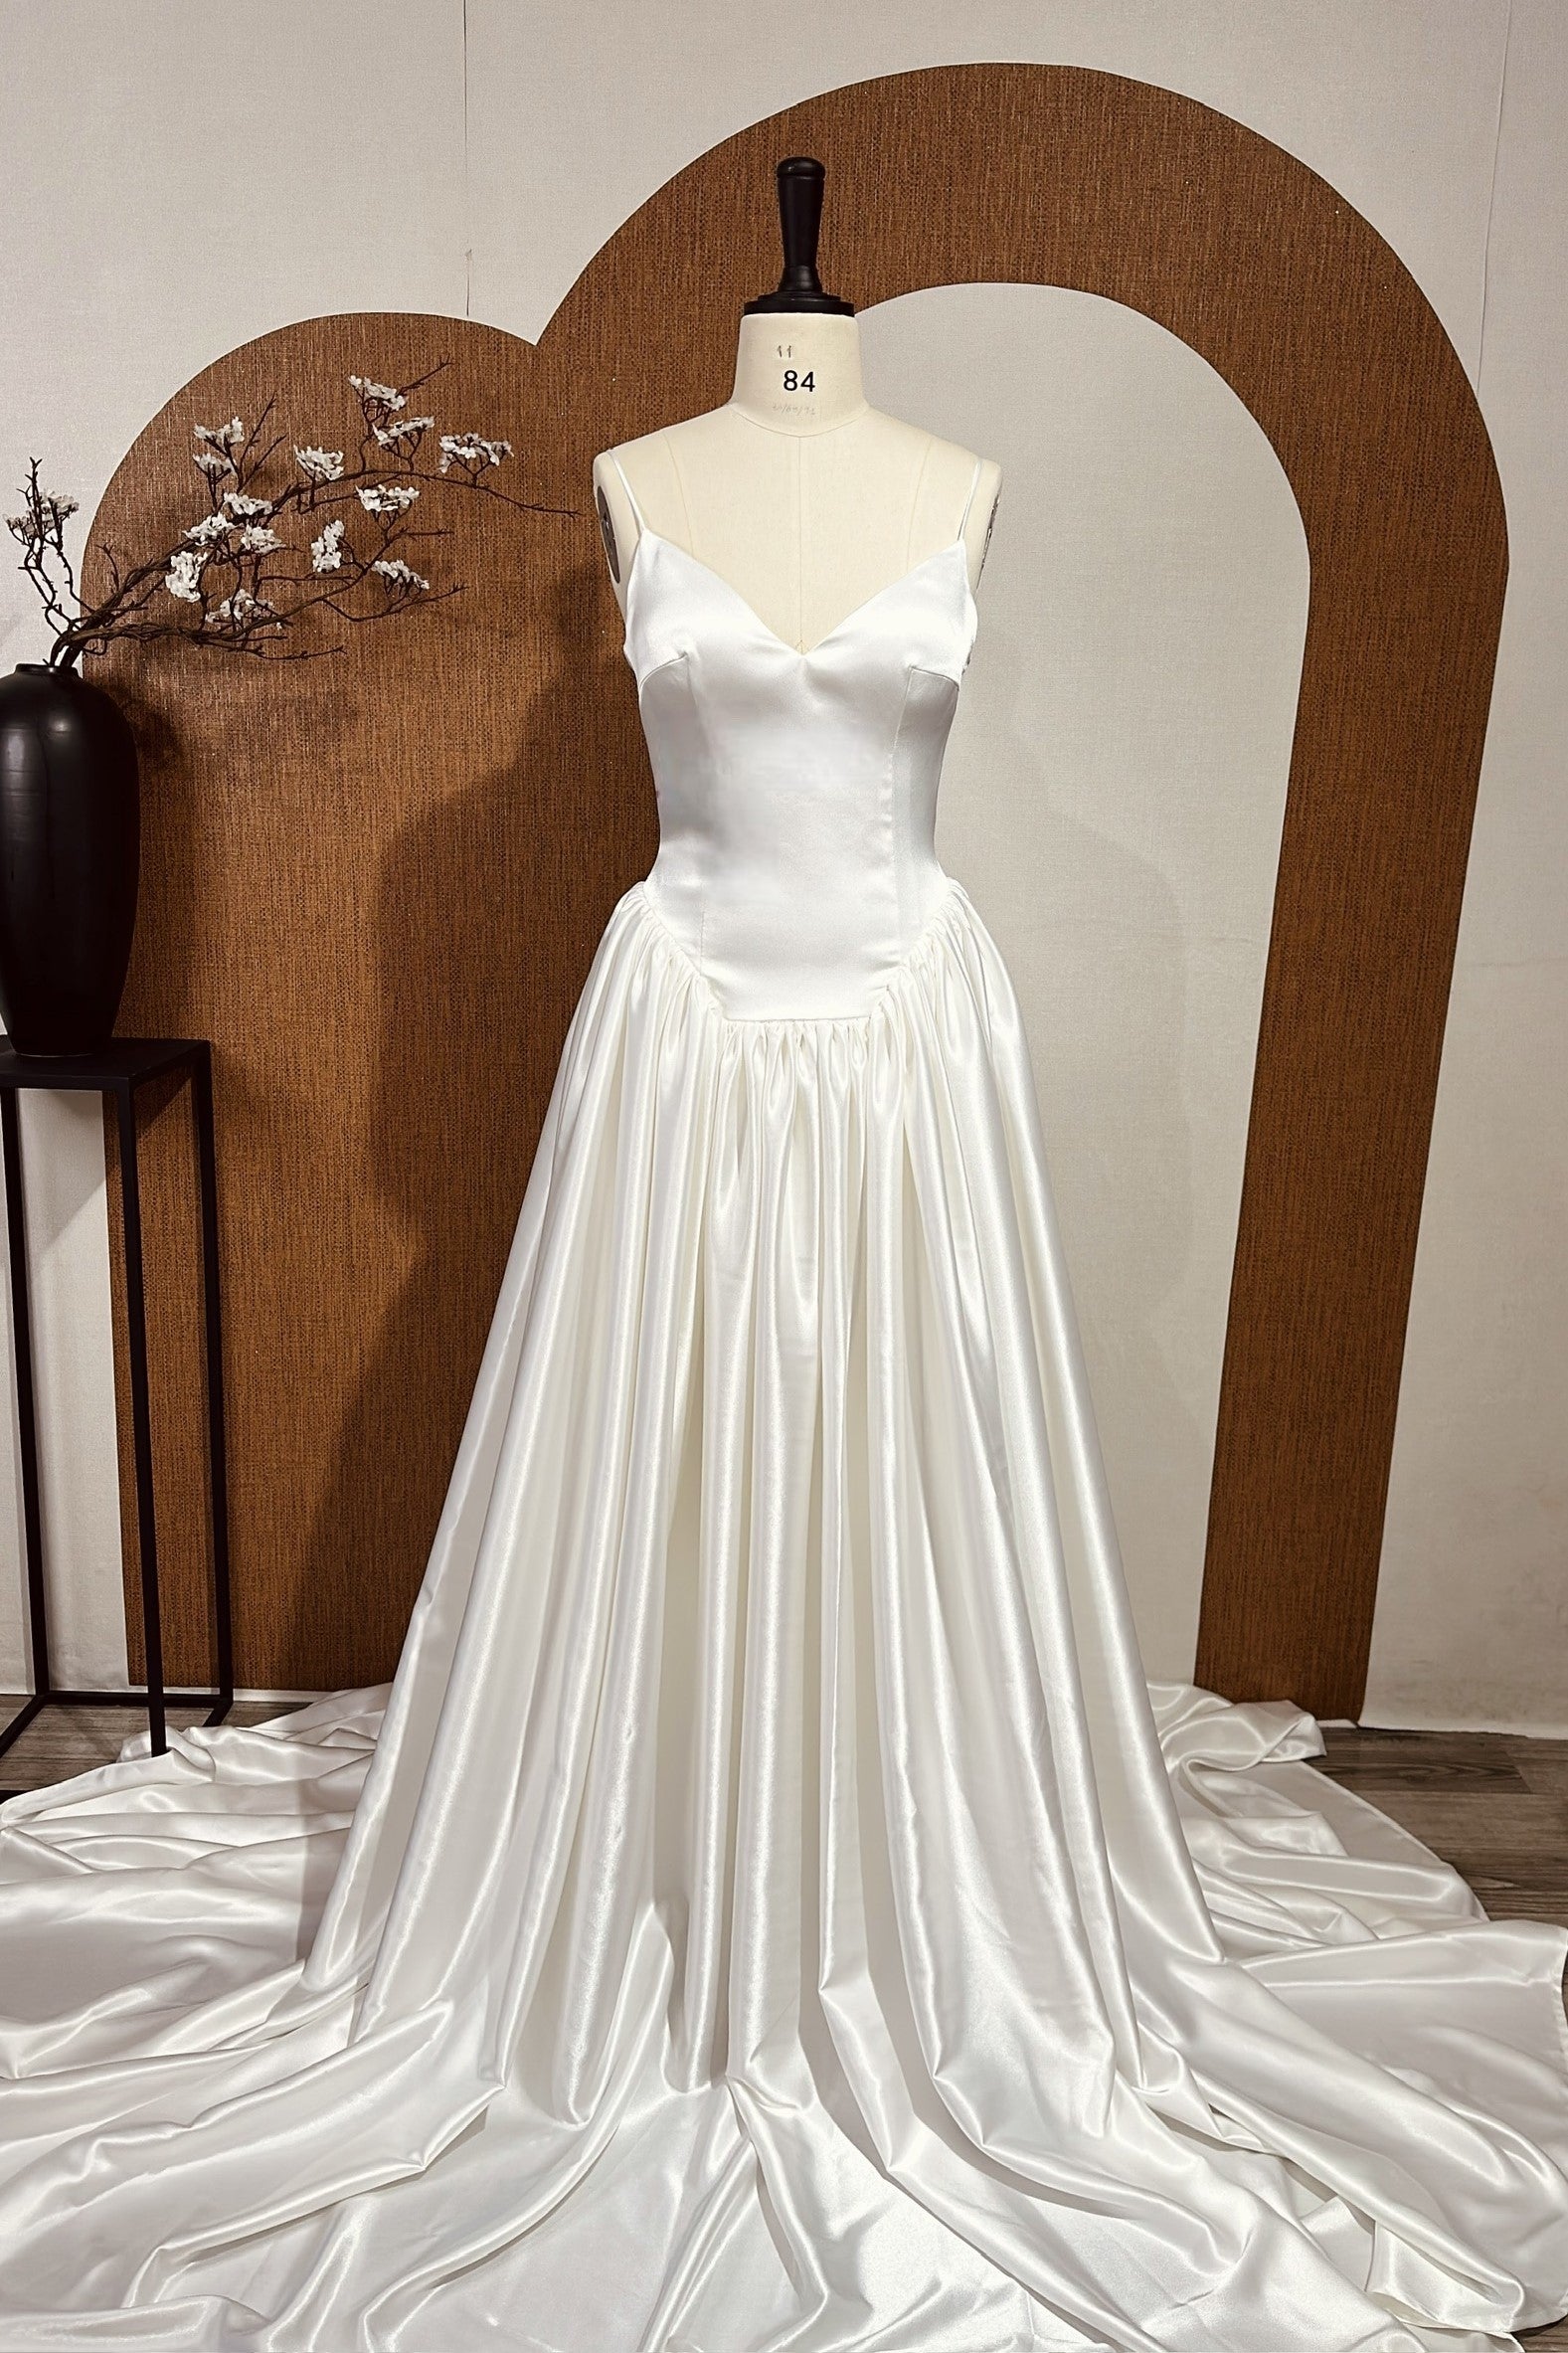 Unique Mermaid Wedding Dress: Satin Wedding Gown Customized to the Bride's Request